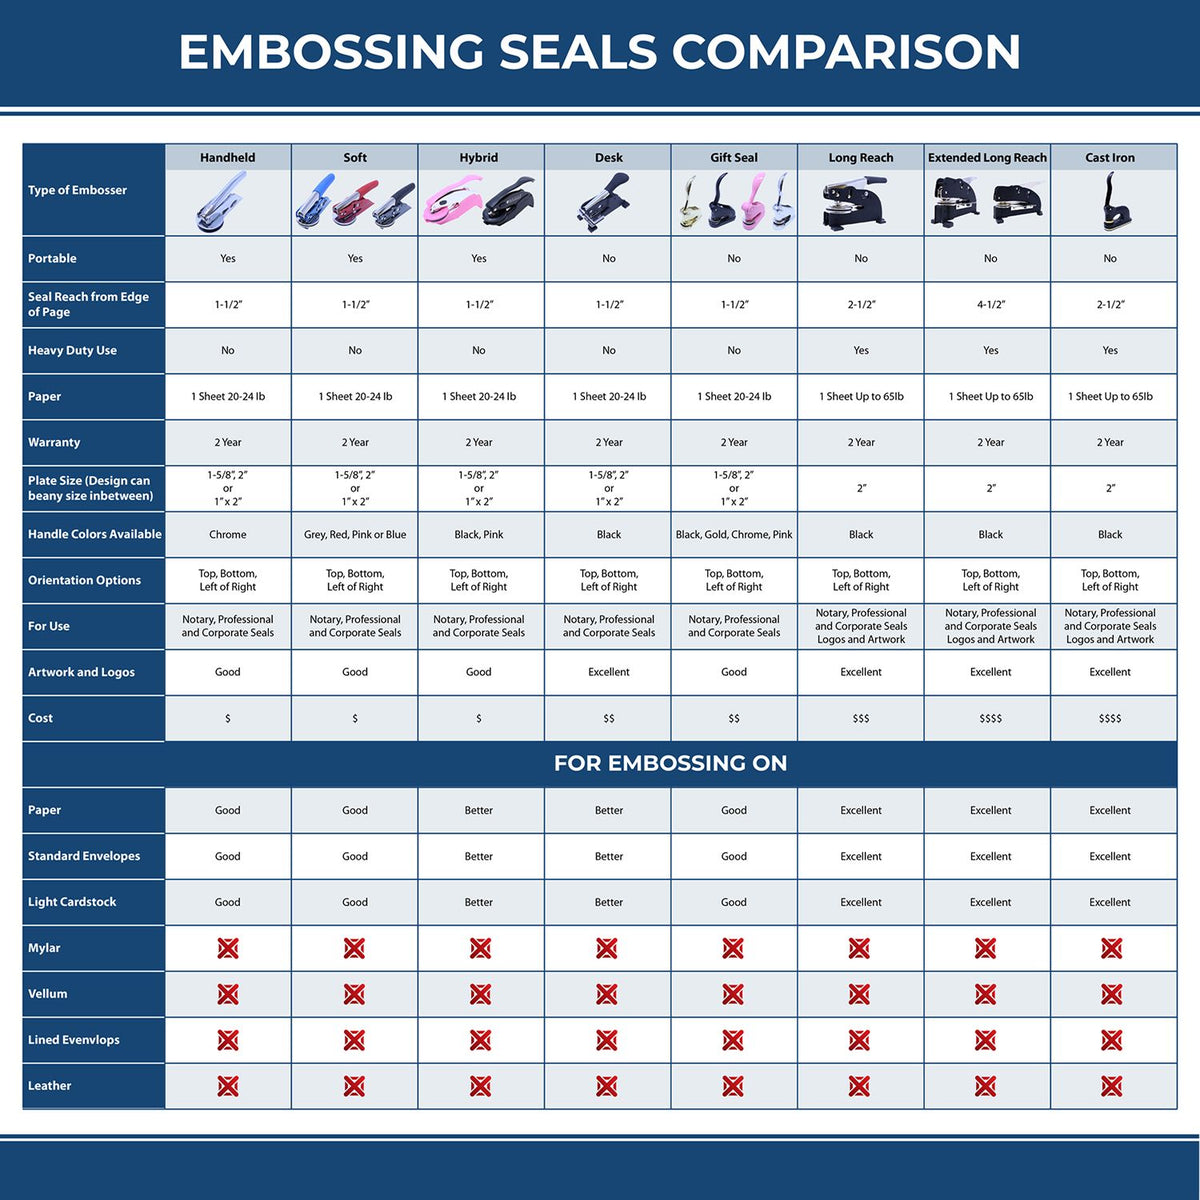 A comparison chart for the different types of mount models available for the Handheld New Hampshire Professional Engineer Embosser.